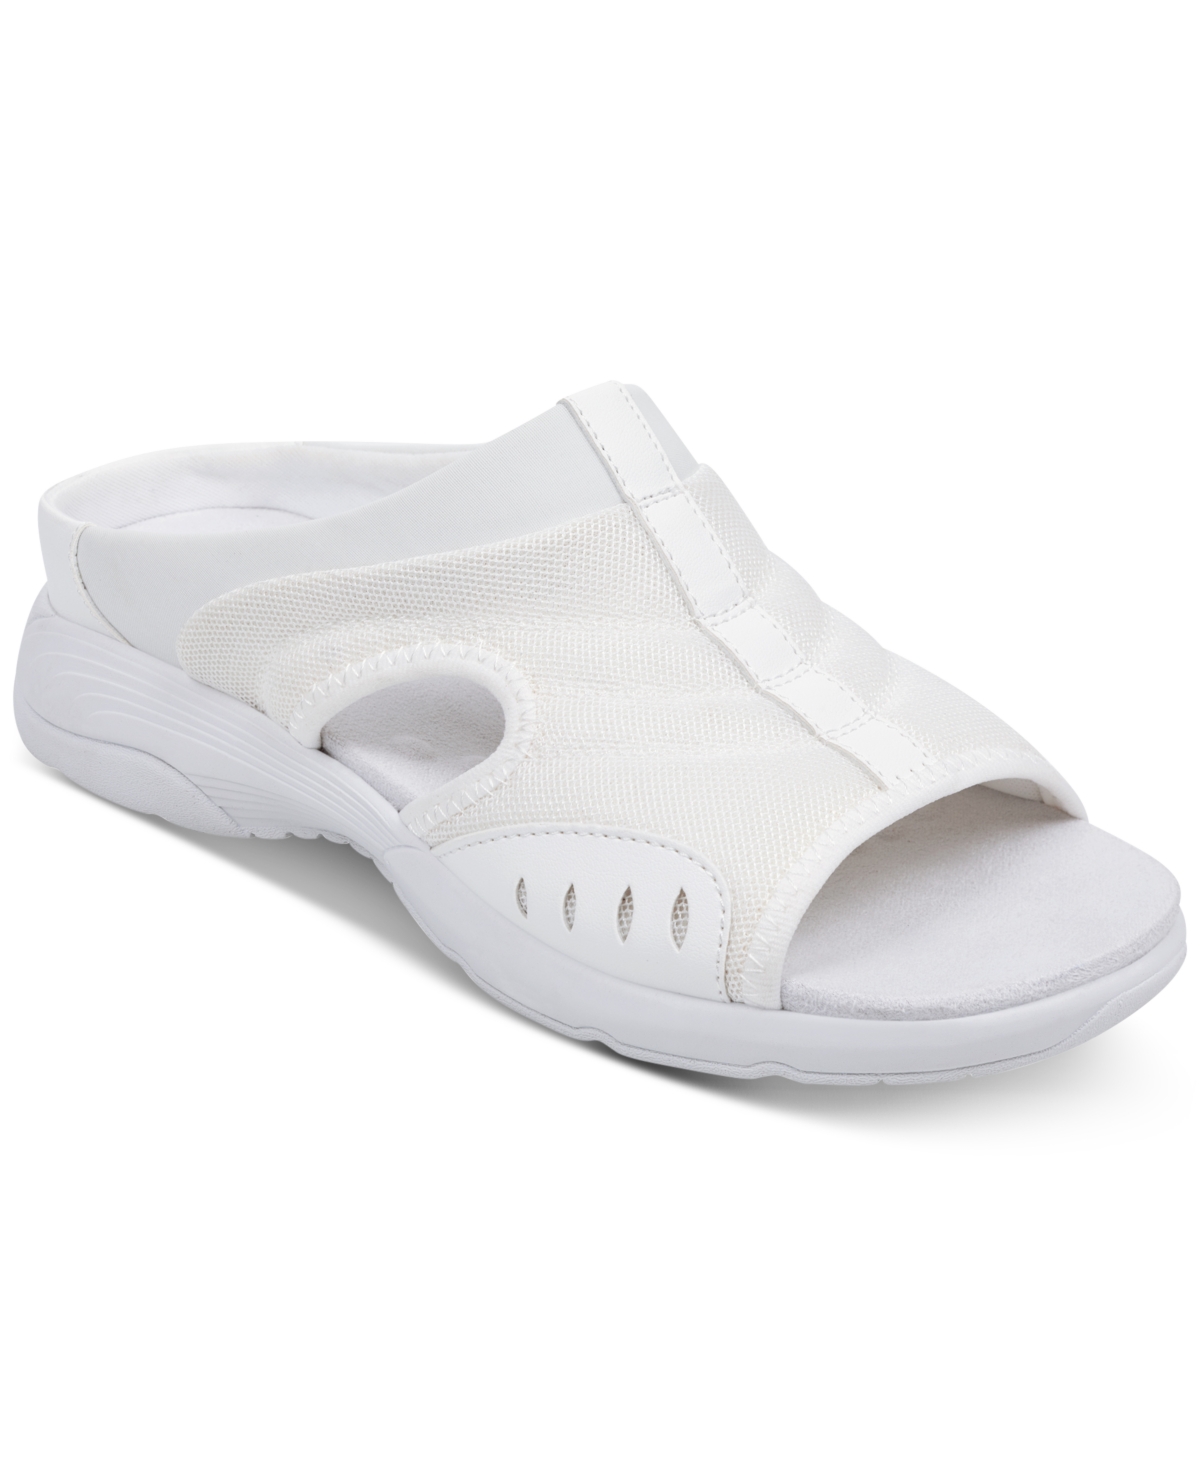 UPC 192733303937 product image for Easy Spirit Women's Traciee Square Toe Casual Flat Sandals Women's Shoes | upcitemdb.com